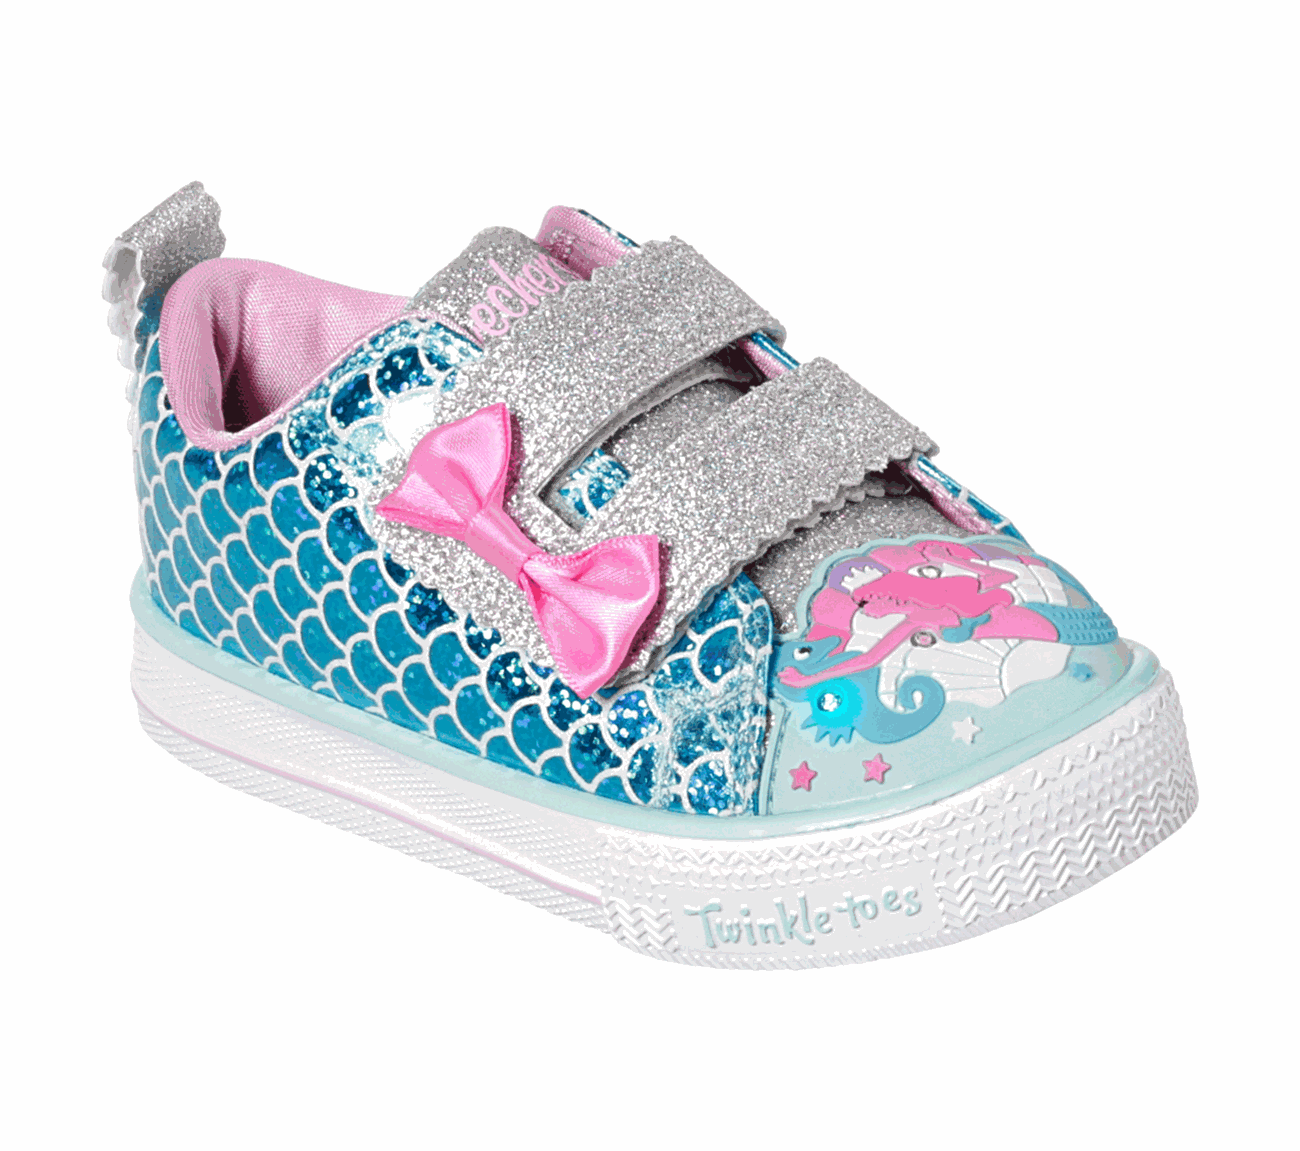 twinkle toes shoes uk